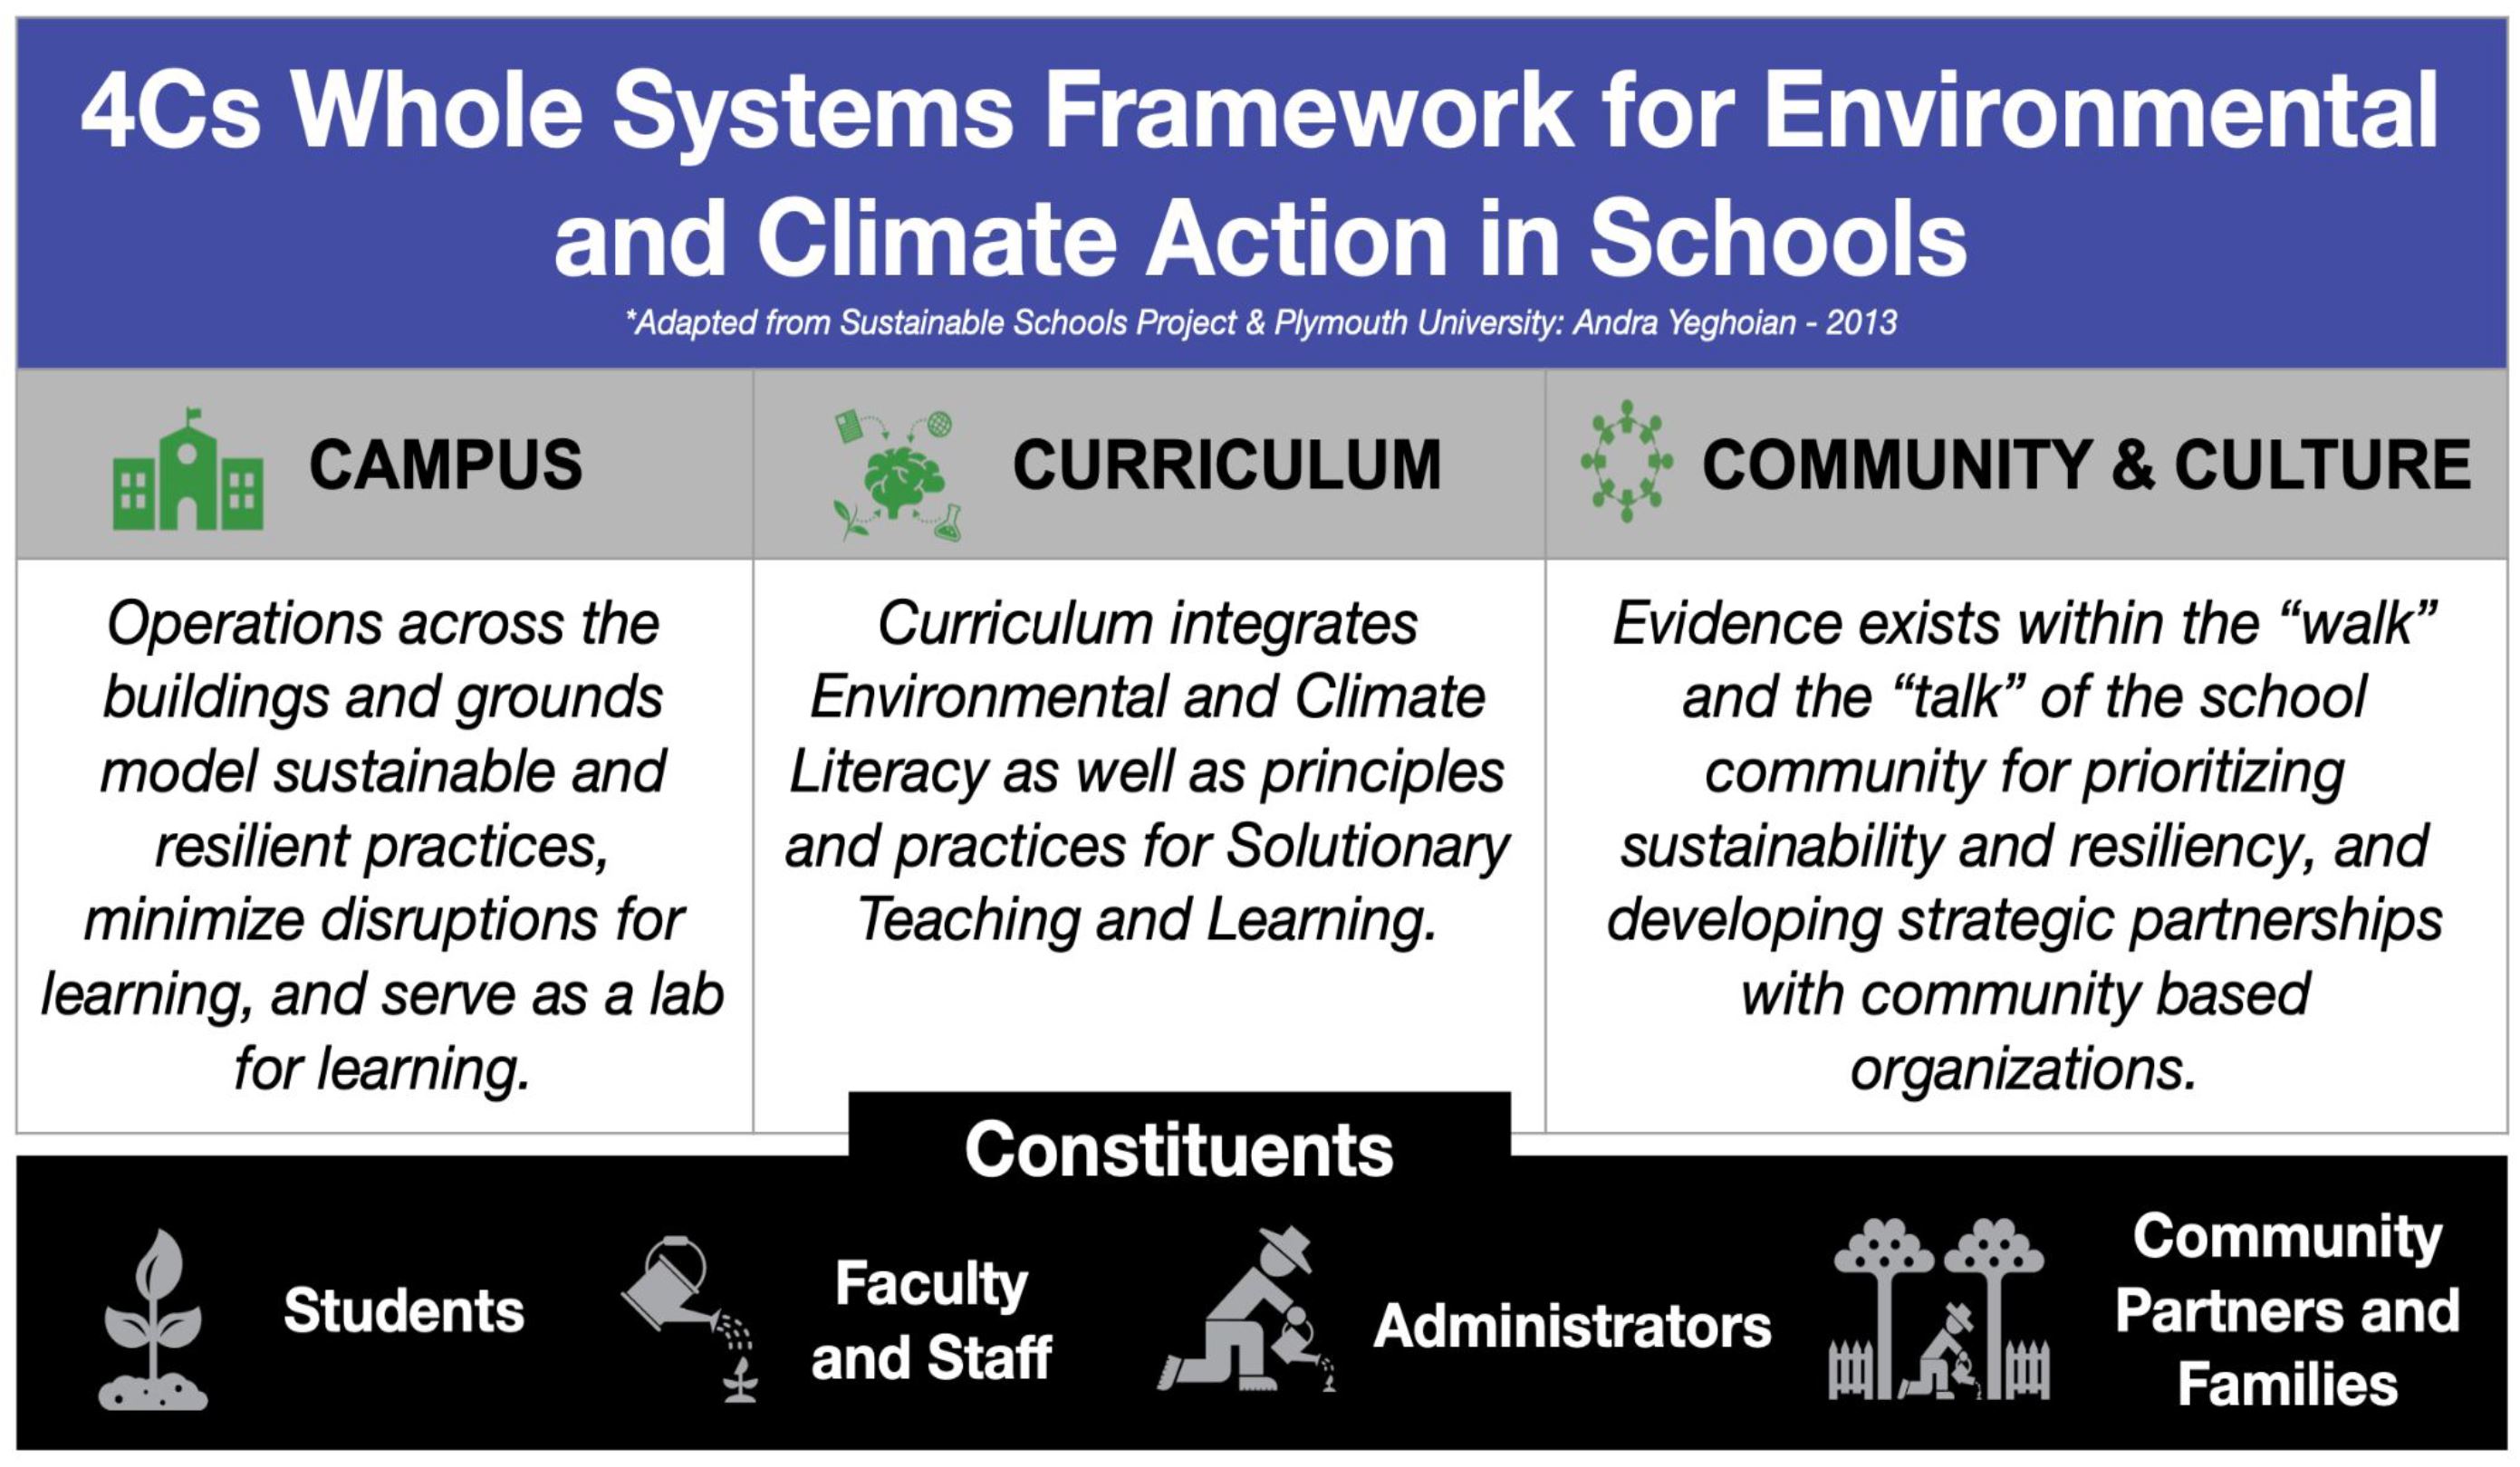 Infographic showing the 4Cs Whole Systems Framework for Environmental and Climate Action in Schools, Campus, Curriculum, Community and Culture